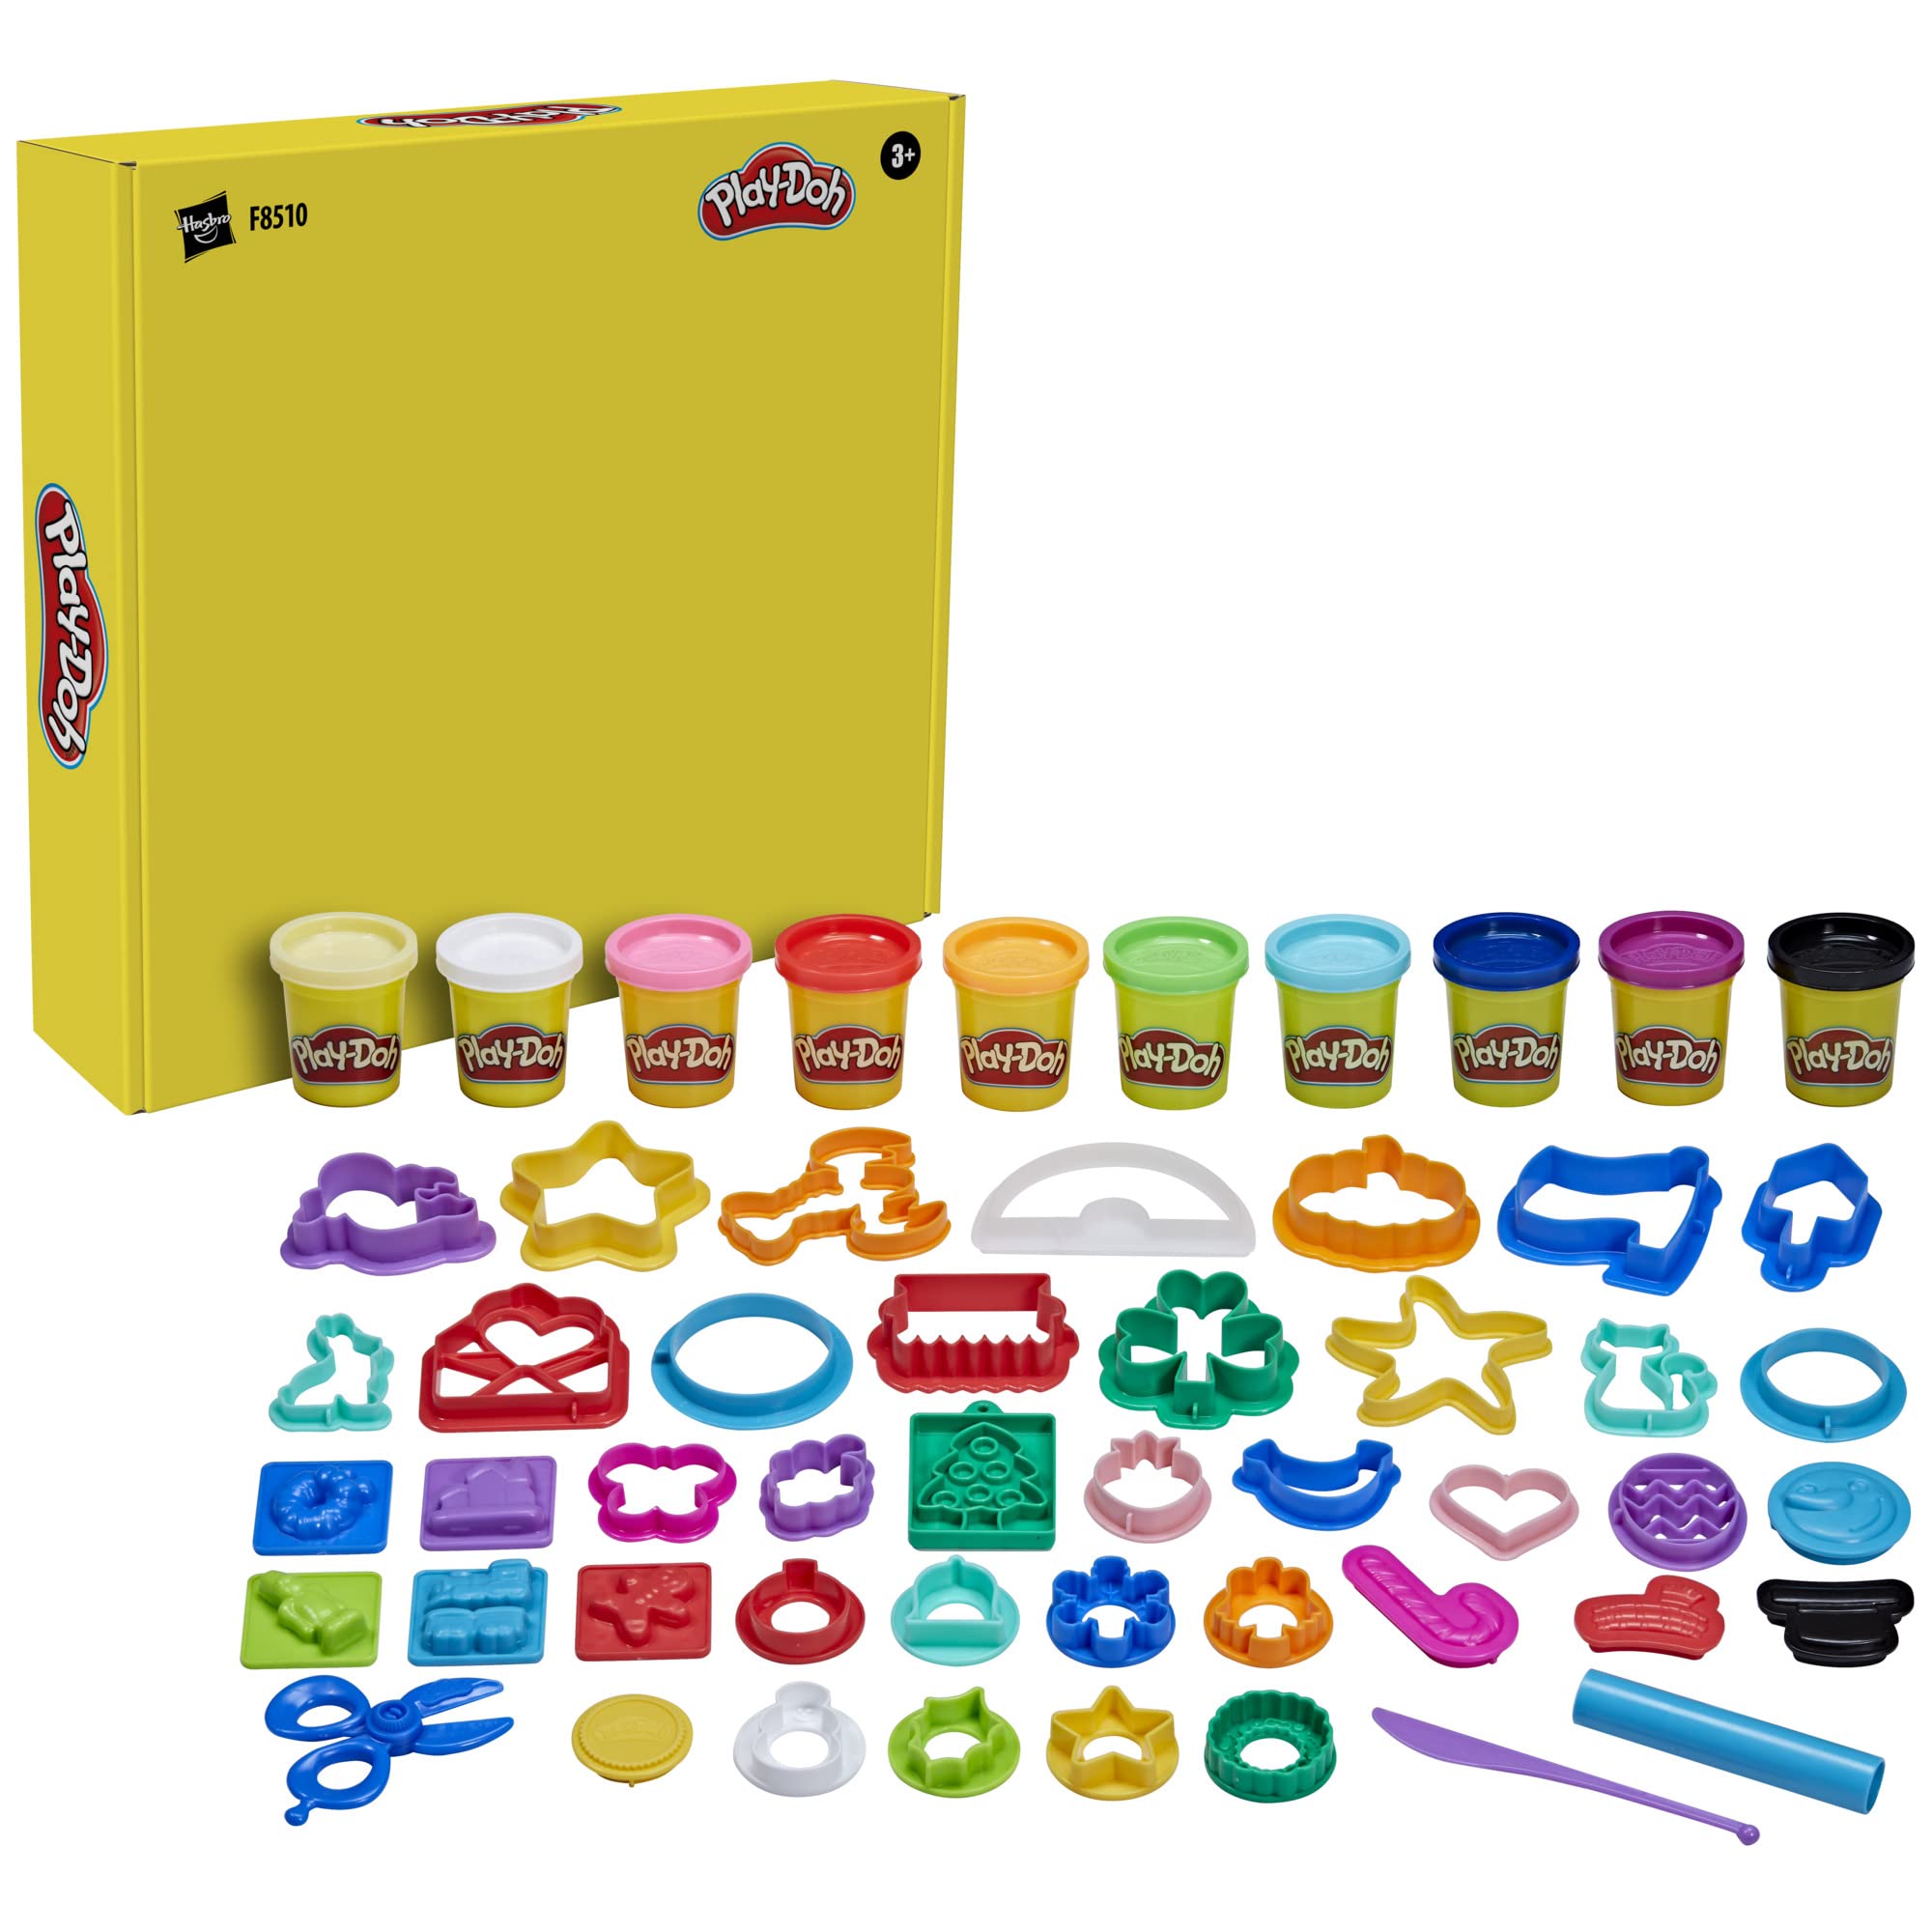 Play-Doh Set of Tools, 43 Accessories & 10 Modeling Compound Colors, Perfect for Halloween Treat Bags, Kids Arts and Crafts Toys, 3+ (Amazon Exclusive)